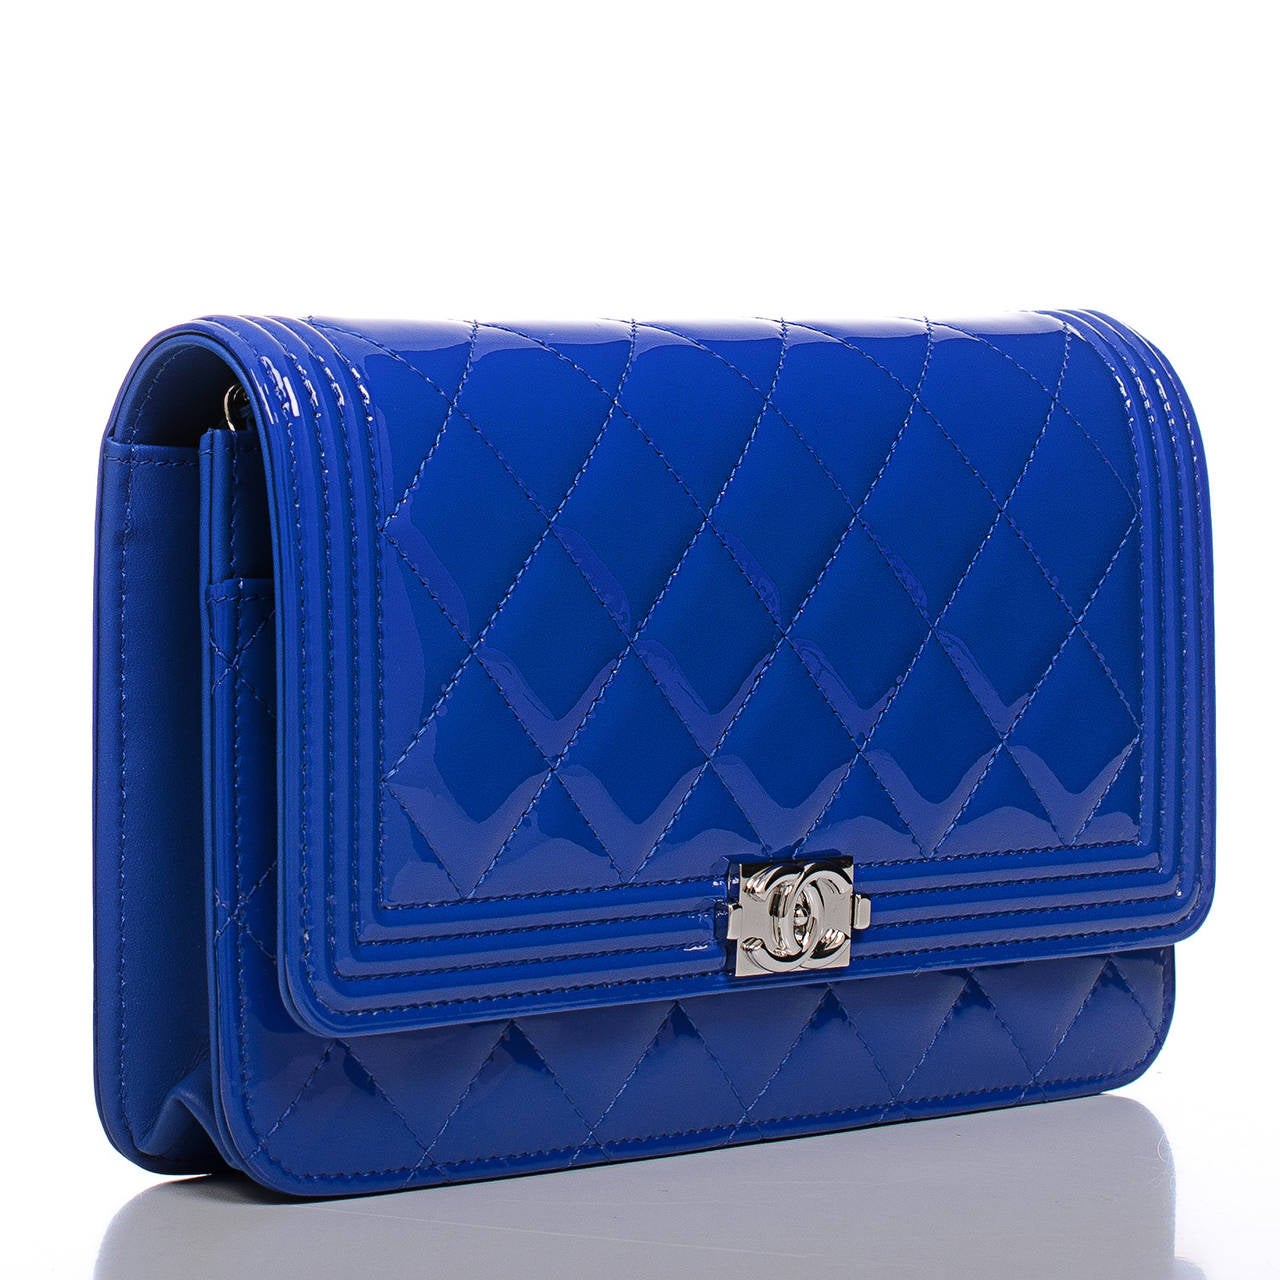 Chanel electric blue Boy Wallet On Chain (WOC) of patent leather with silver tone hardware.

The Wallet On Chain (WOC) is one of the most desired Chanel accessories. Its great styling, versatility and attractive price point makes it a must for new